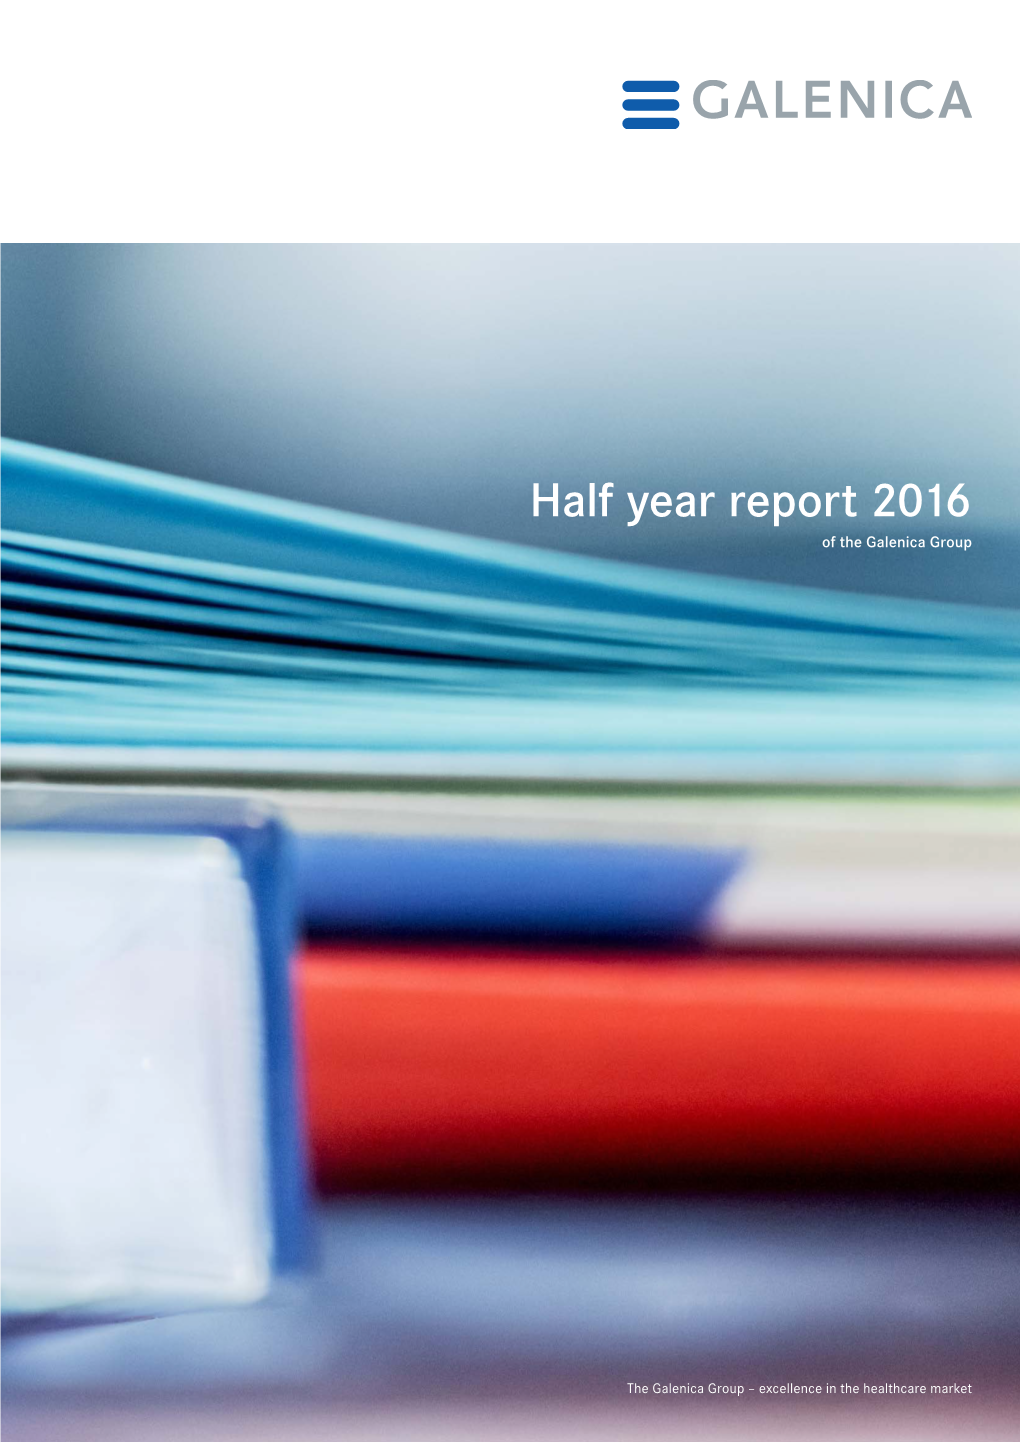 Half Year Report 2016 of the Galenica Group